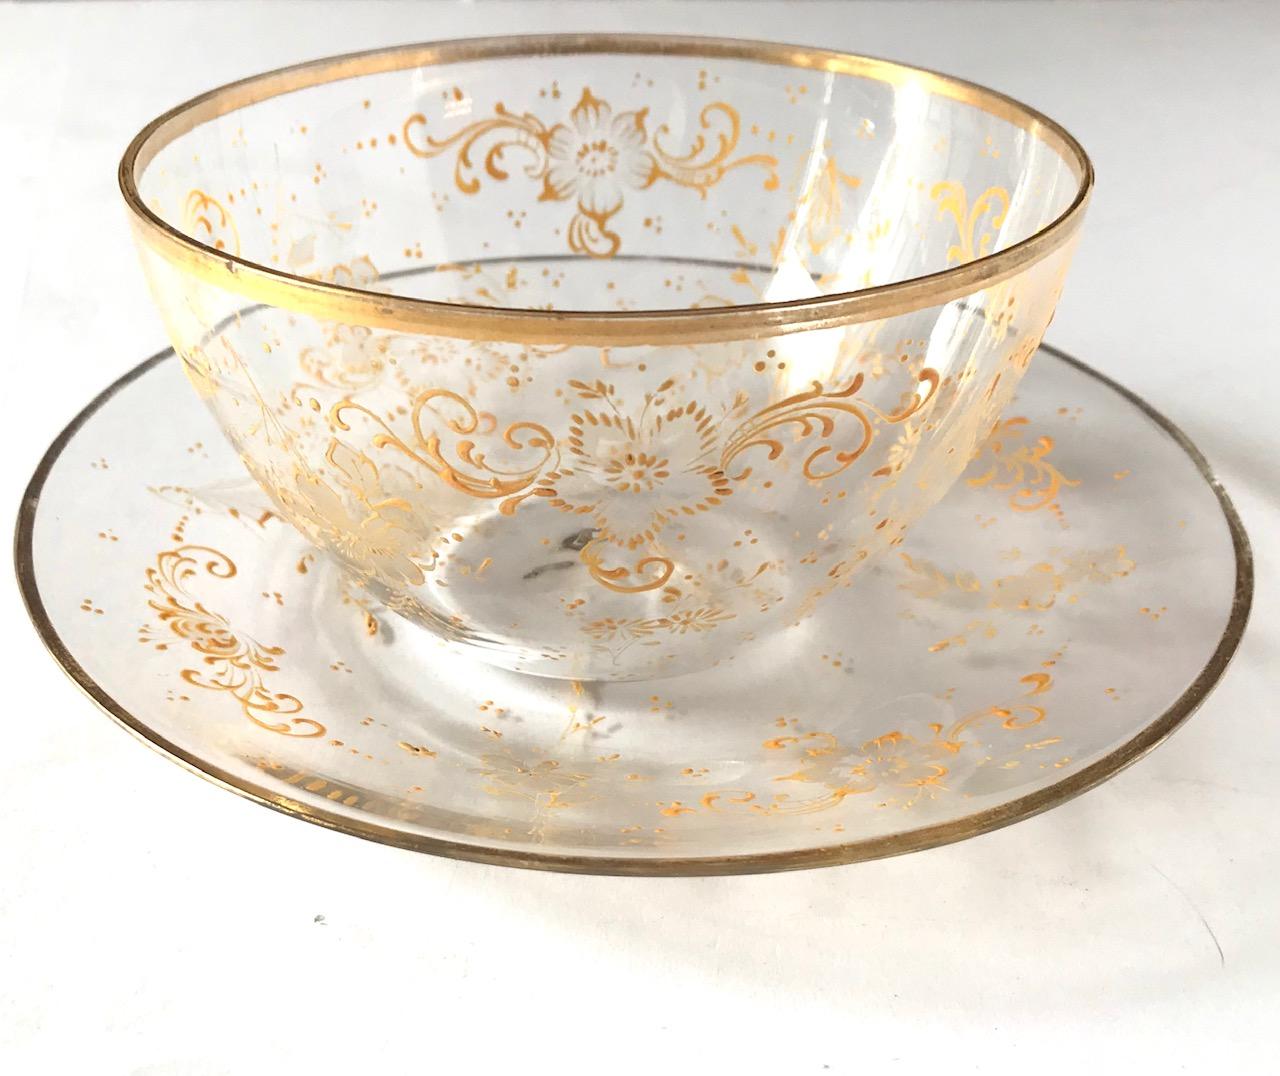 These bowls are made in the late 19th century by J & L Lobmeyr of Vienna, Austria. They are embellished with elegant, delicate Rococo style relief enameled ornaments and gold rimmed. The design is a beautiful scrolling floral motive. Although the